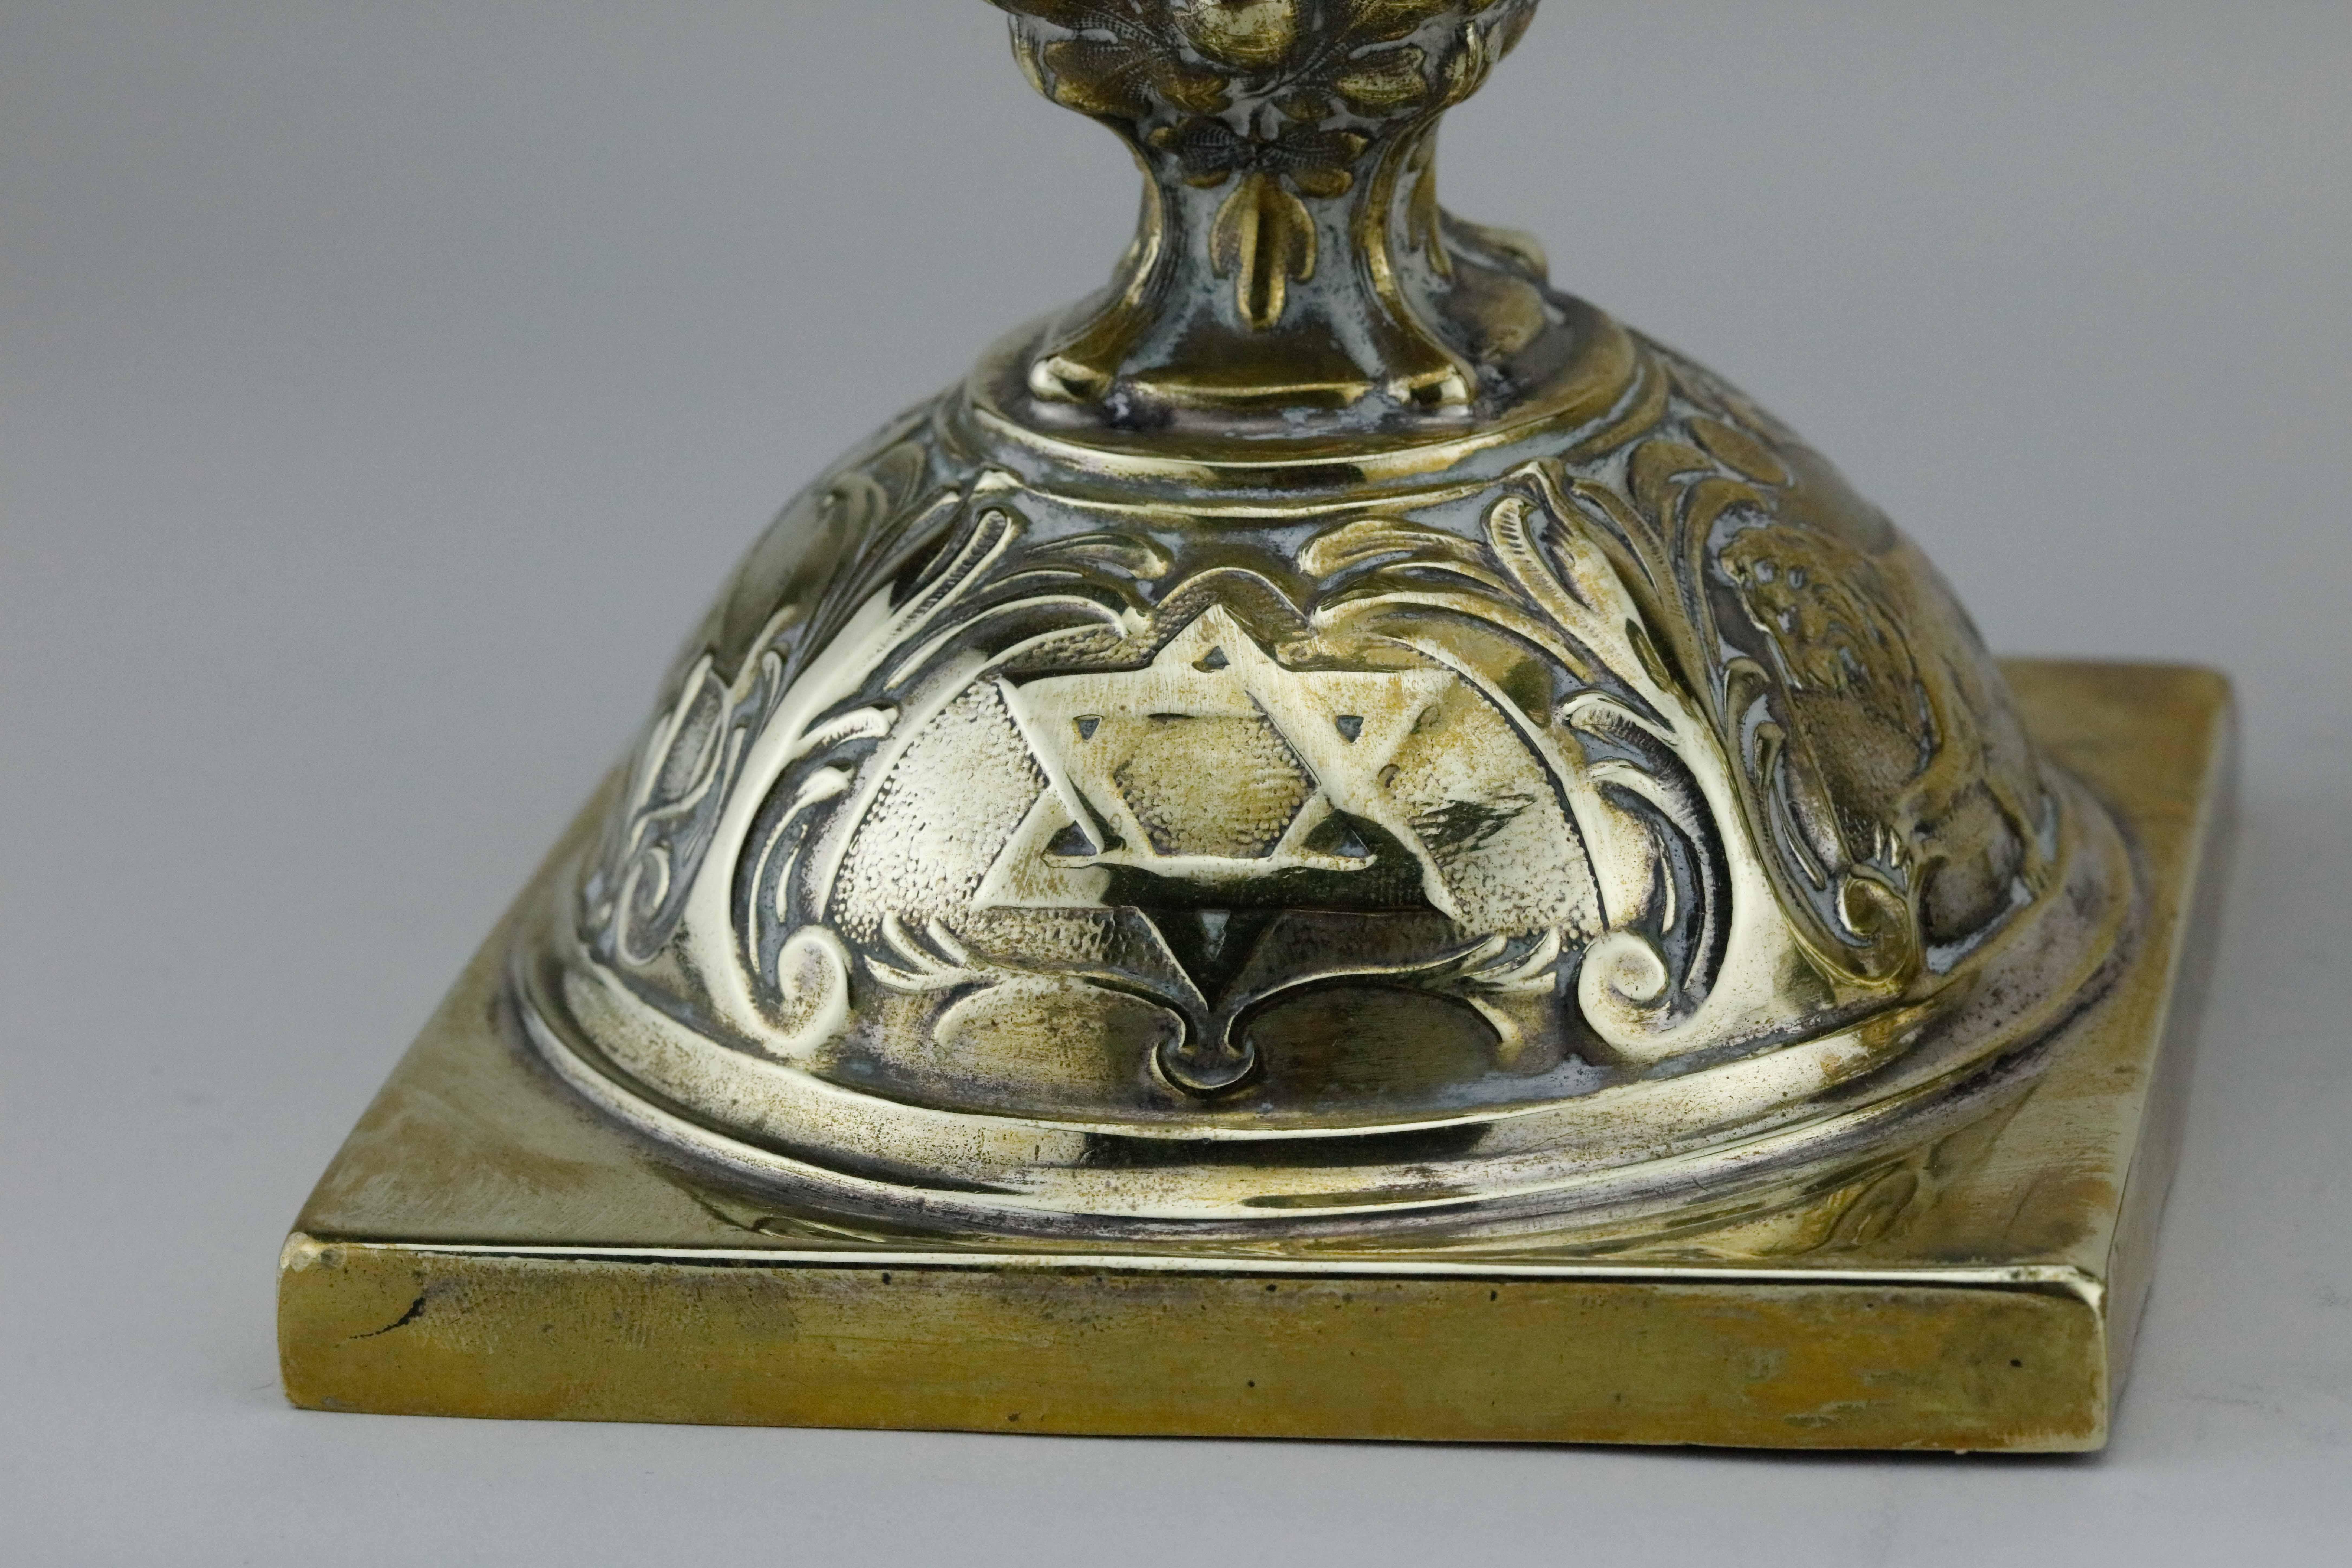 Rare pair of brass Shabbat candlesticks, Warsaw, Poland, 1908.
These matching Shabbat candlesticks, impressed with lions and Star of David, are the result of assembly-line production that was abundant in Warsaw during the end of the nineteenth and